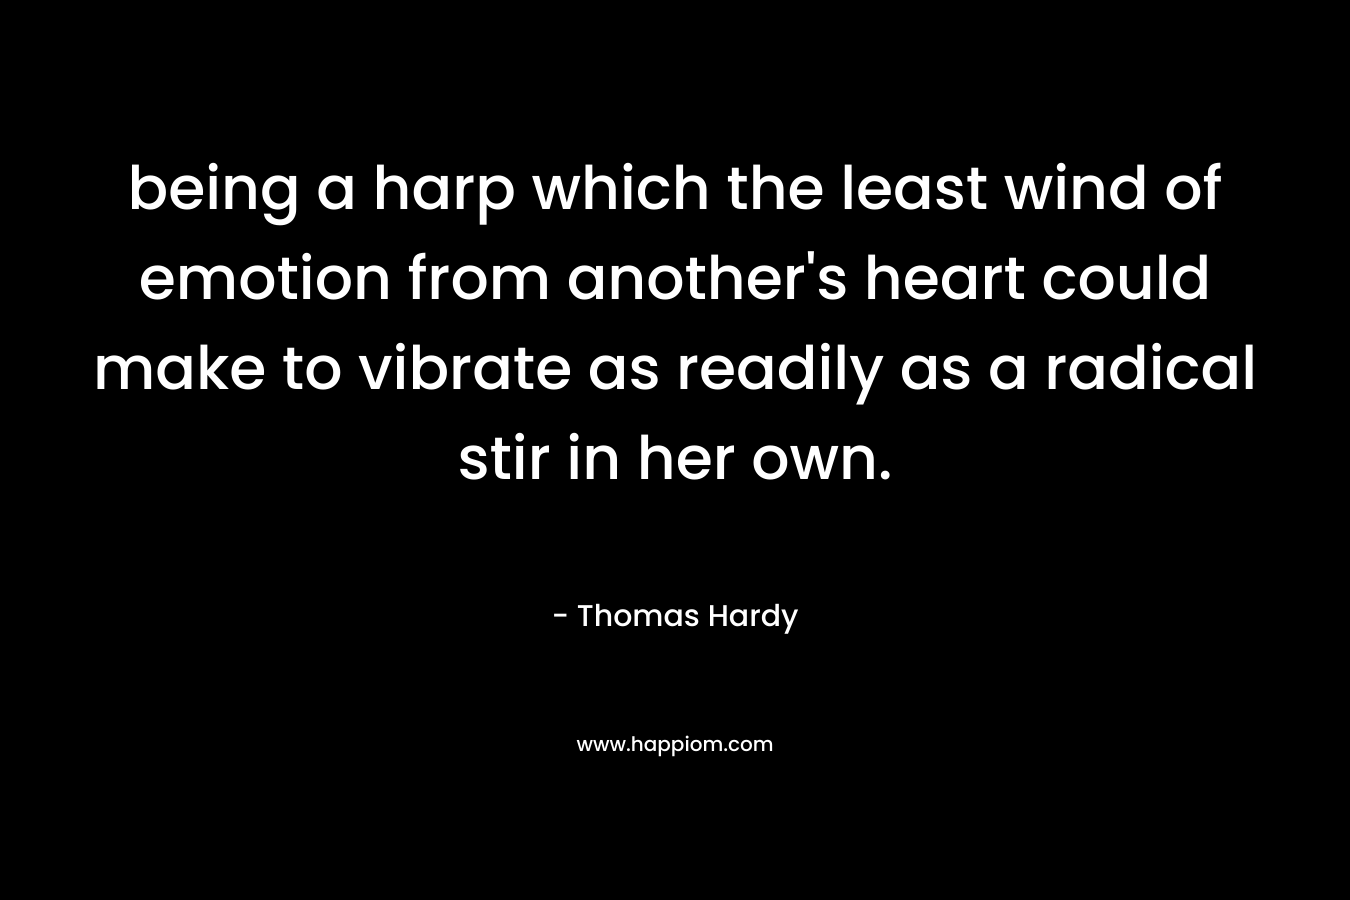 being a harp which the least wind of emotion from another’s heart could make to vibrate as readily as a radical stir in her own. – Thomas Hardy